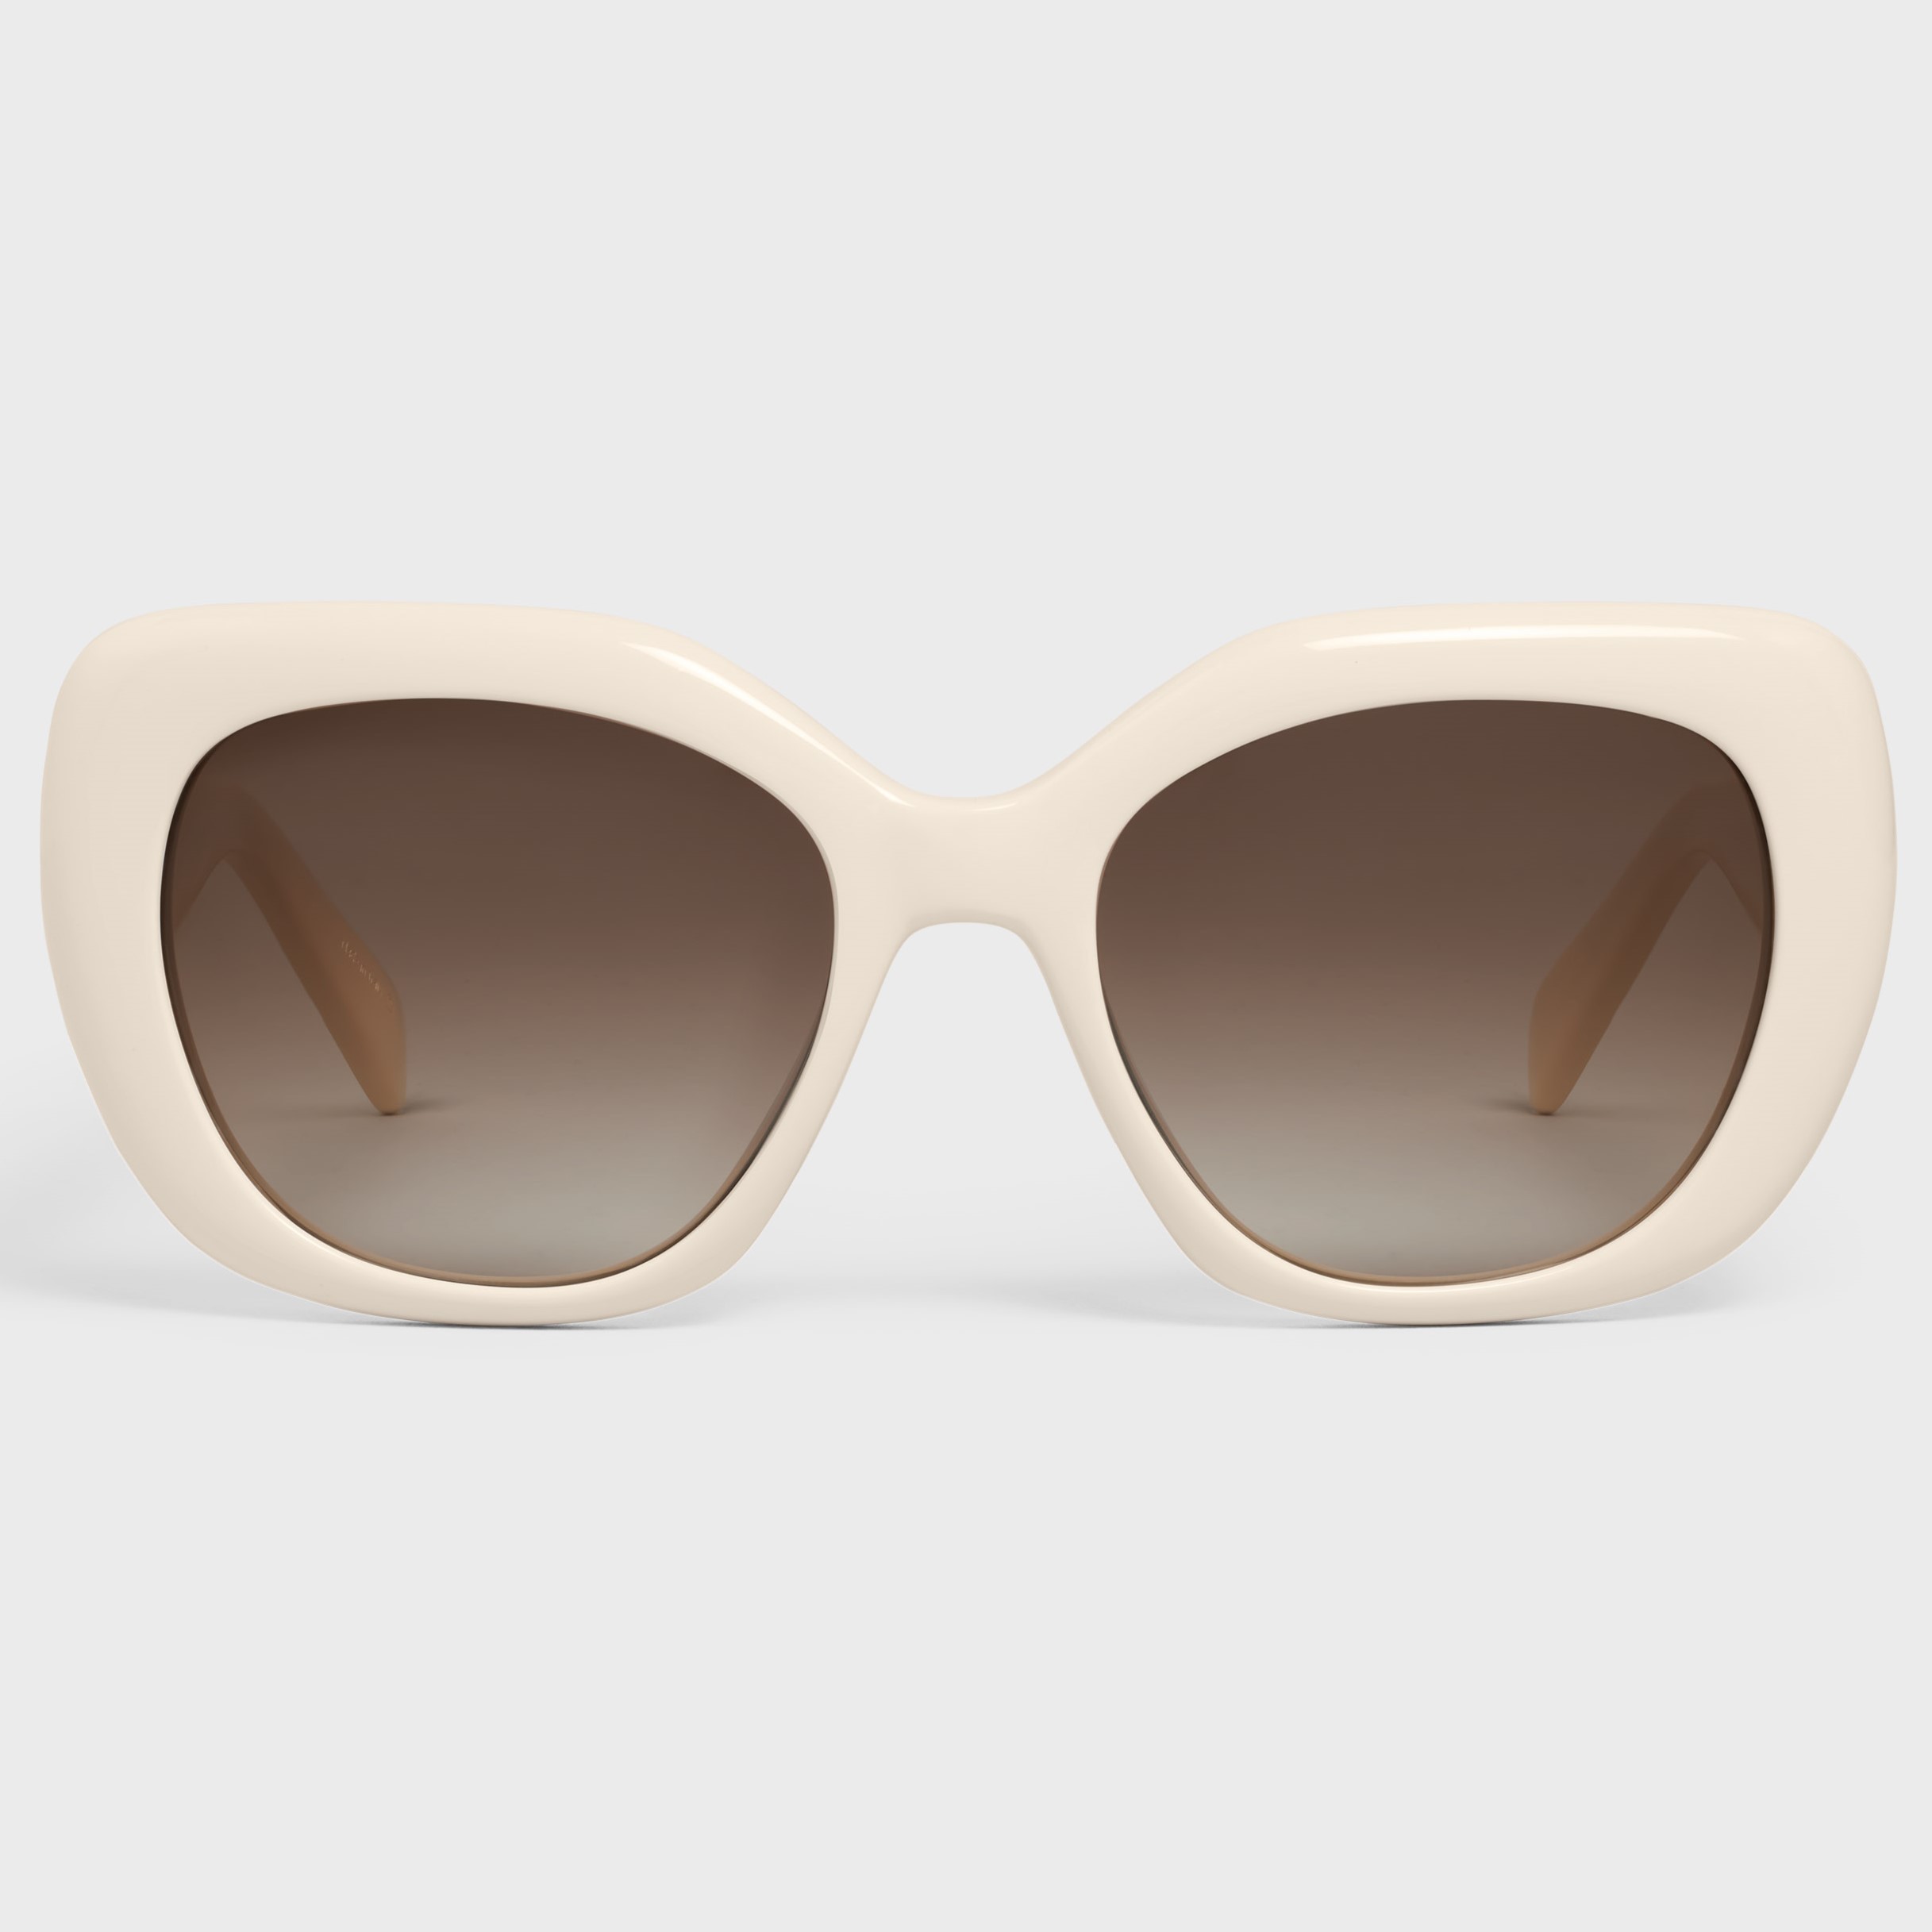 MẮT KÍNH NỮ CELINE TRIOMPHE 06 SUNGLASSES IN IVORY SQUARE ACETATE 7